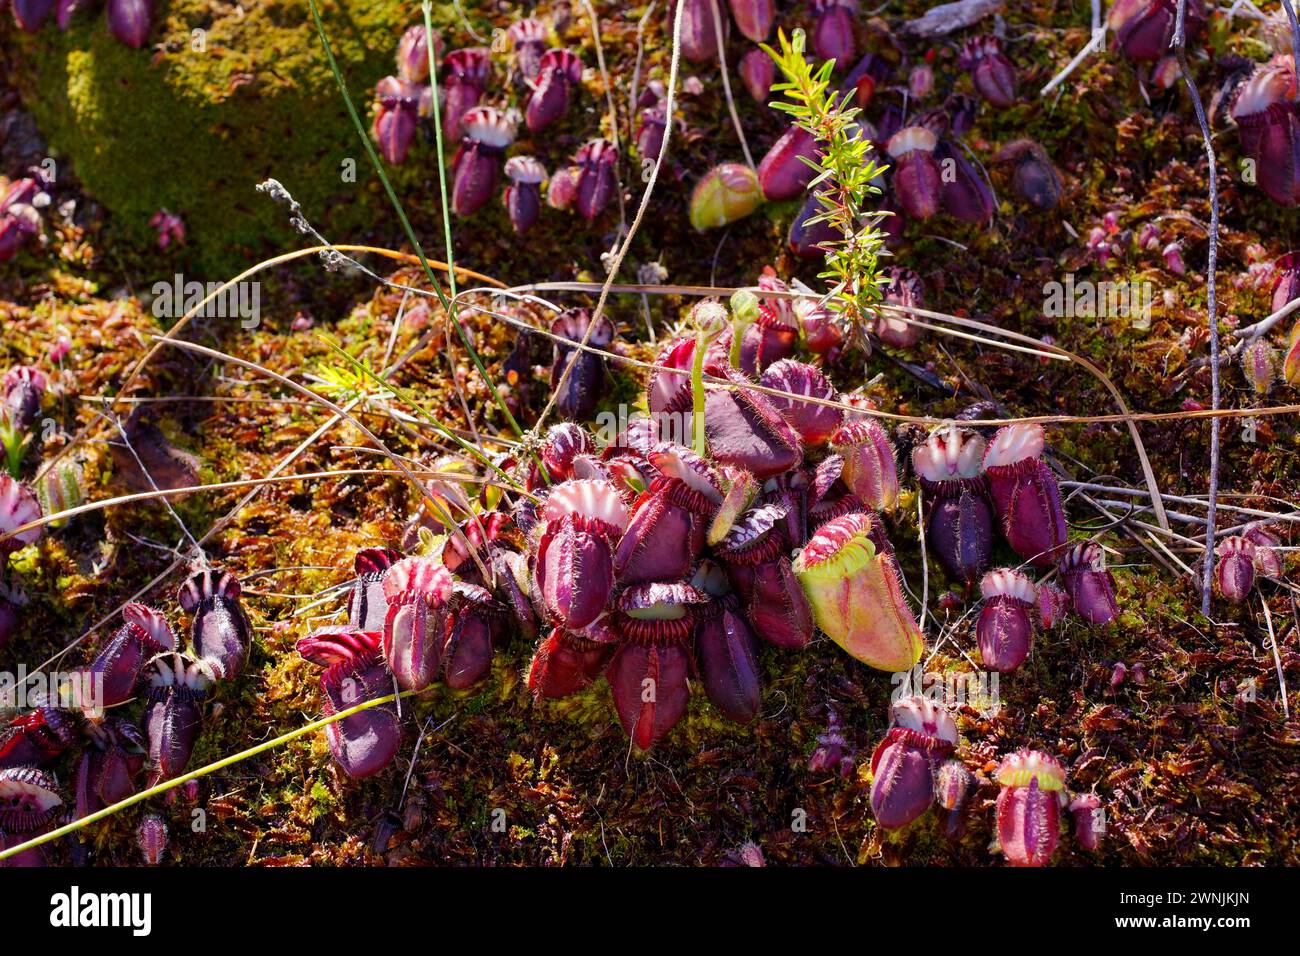 Red pitchers of the Albany pitcher plant (Cephalotus follicularis) with emerging flower stalks, growing in moss in natural habitat, Western Australia Stock Photo